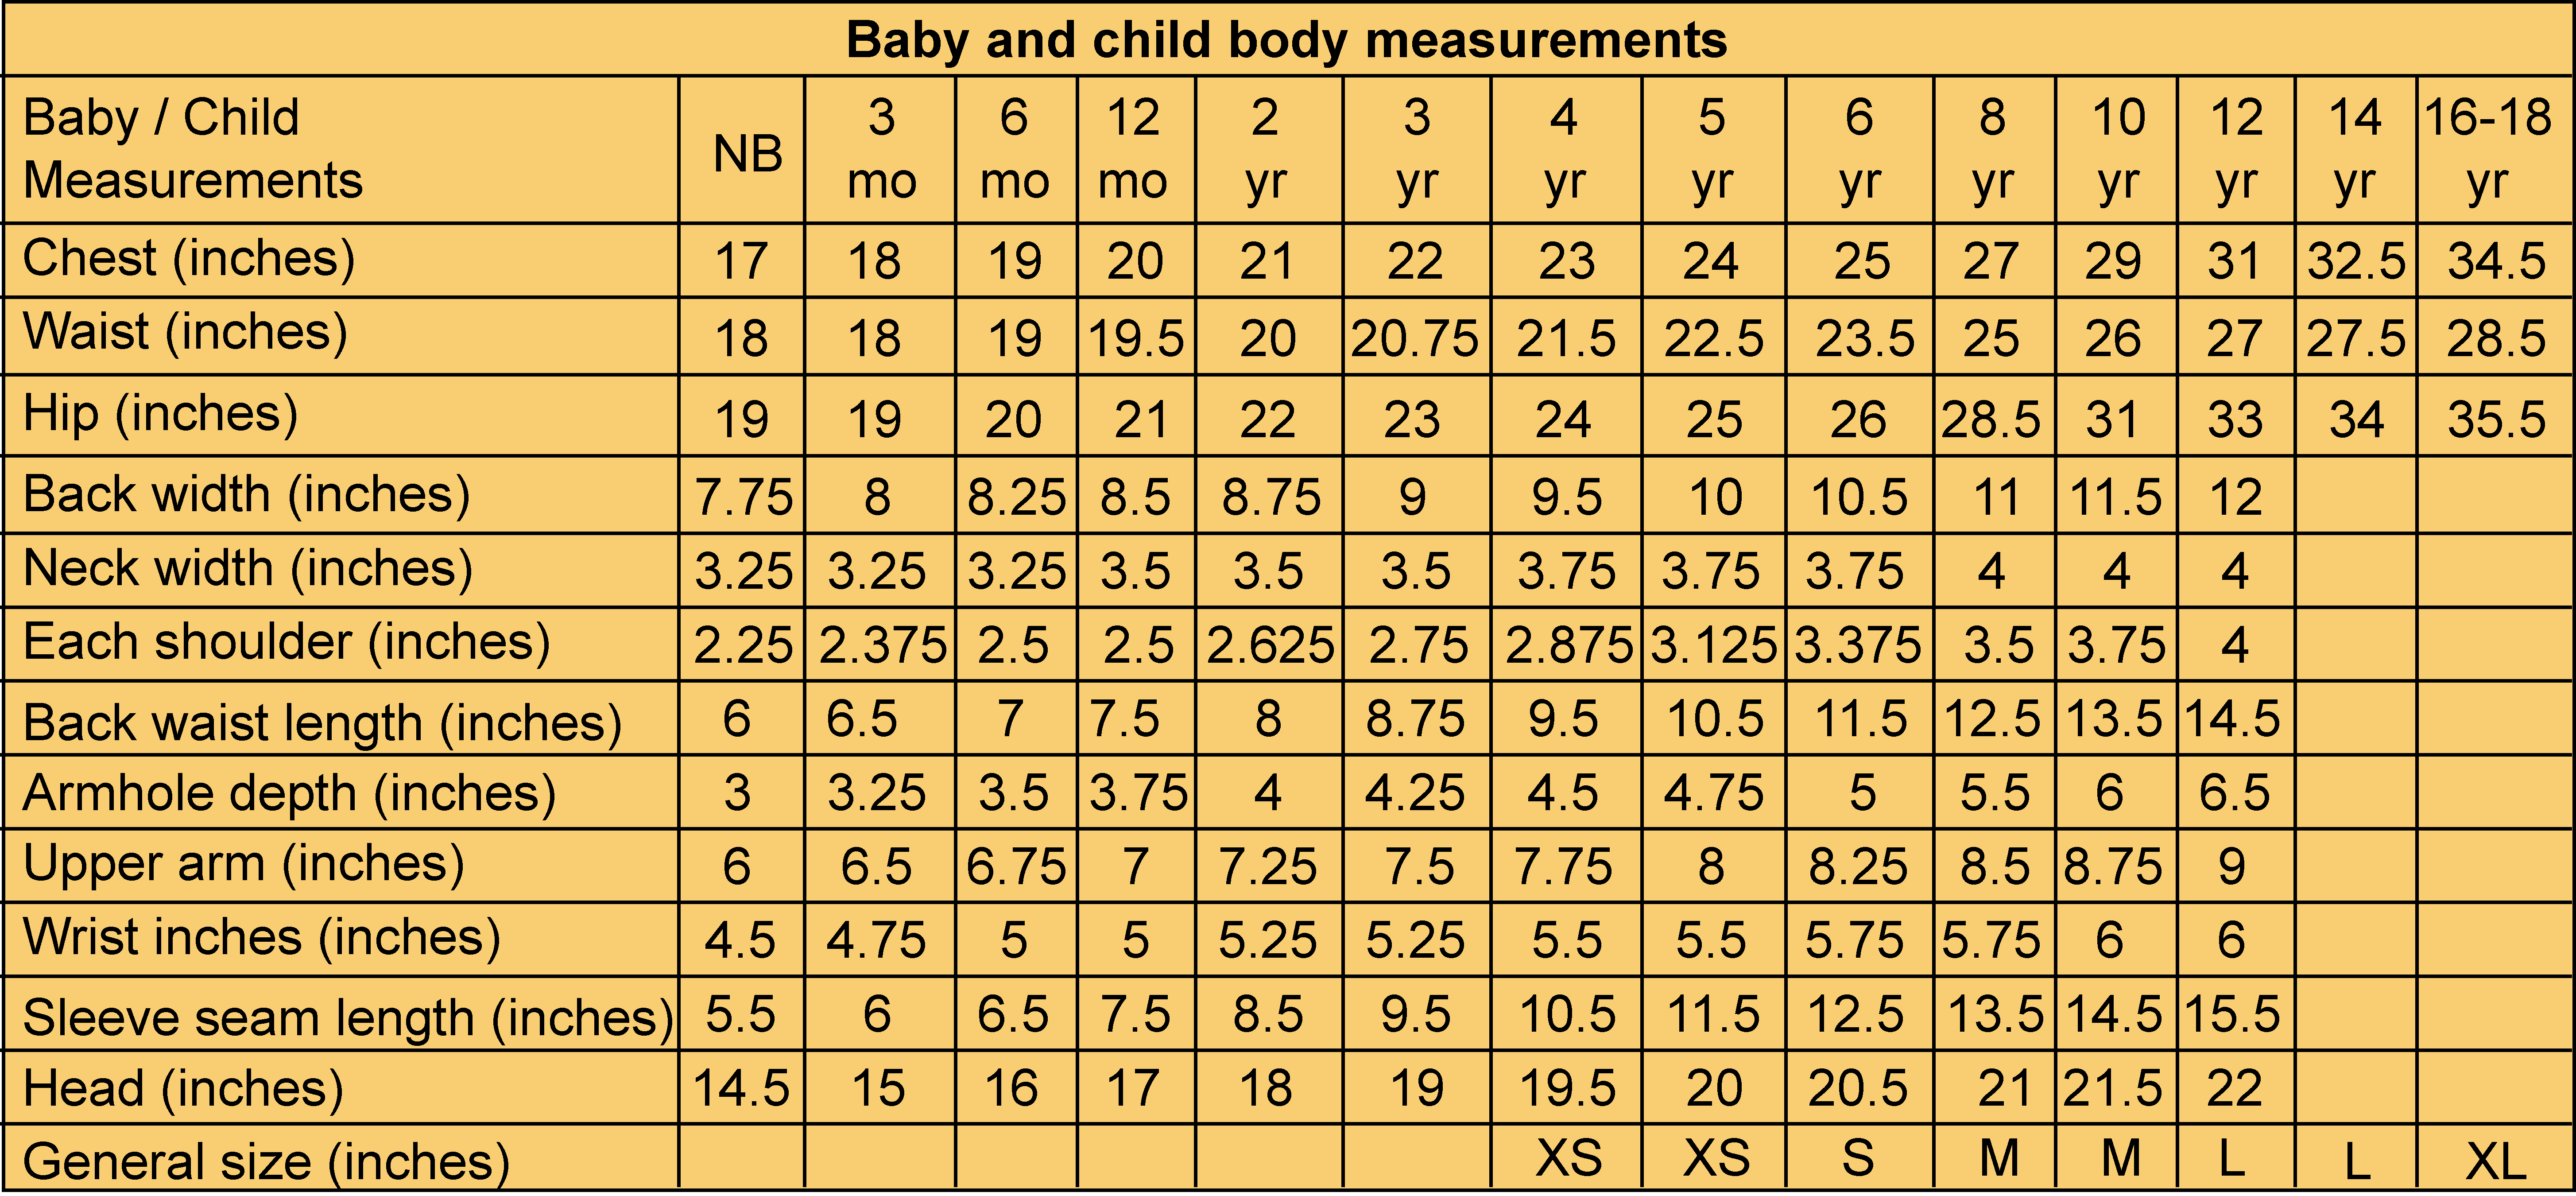 Body measurements for babies and children